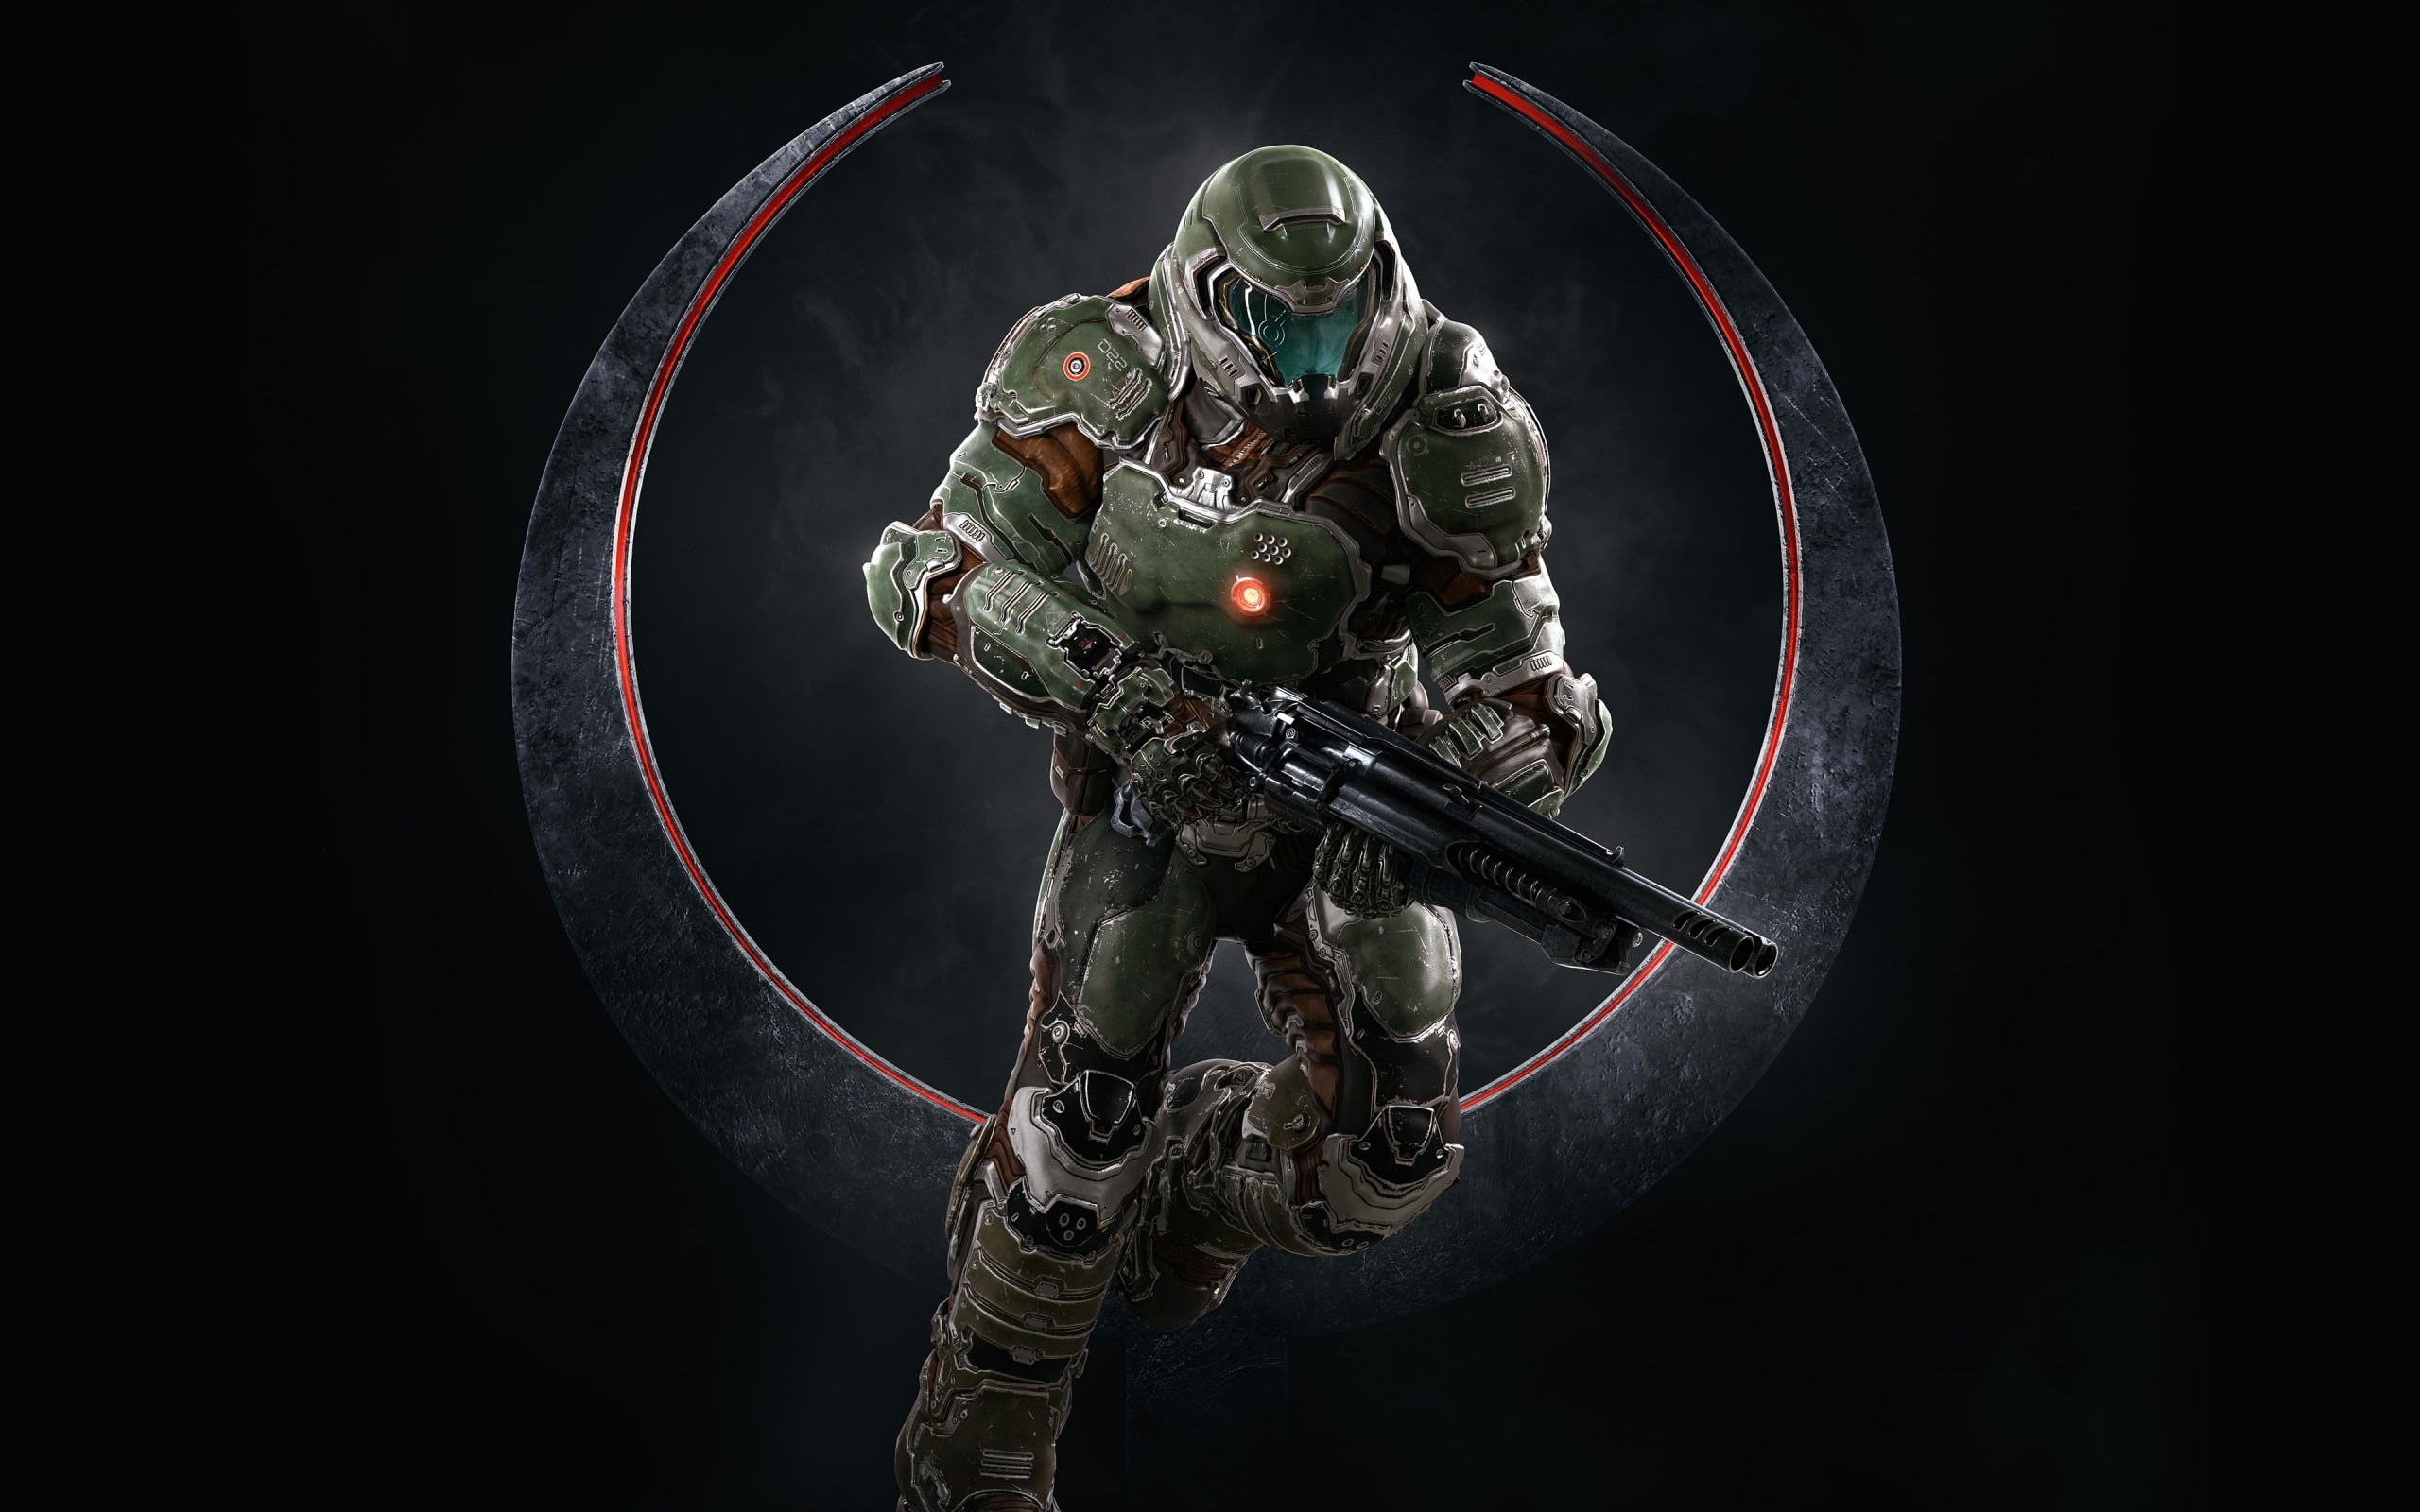 Quake champions doomguy-2017 Game HD Wallpapers, indoors, black background